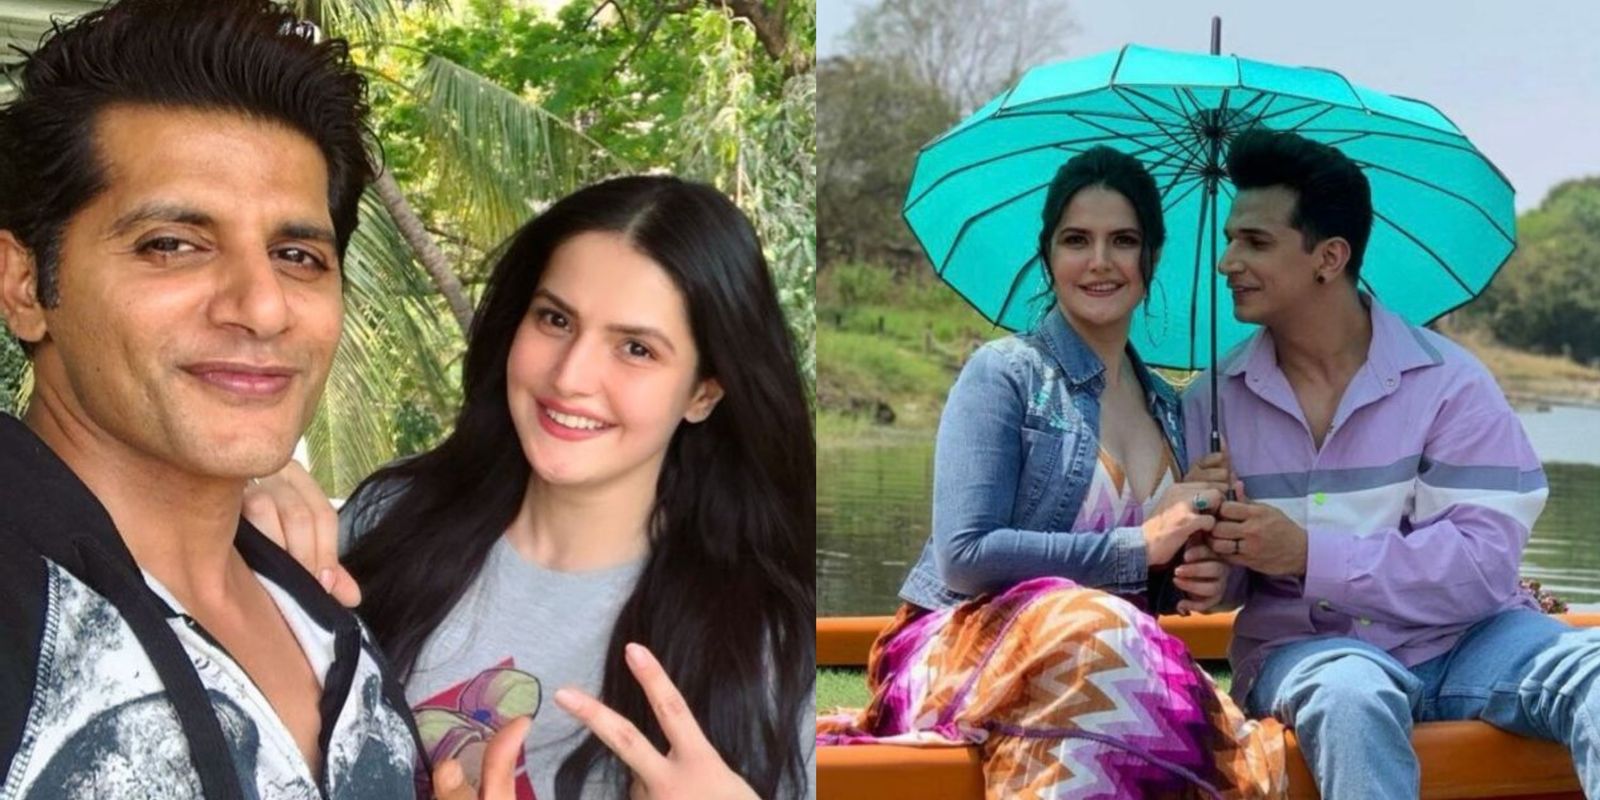 Zareen Khan Opens Up About Working With Karanvir Bohra And Prince Narula In Her Upcoming Projects